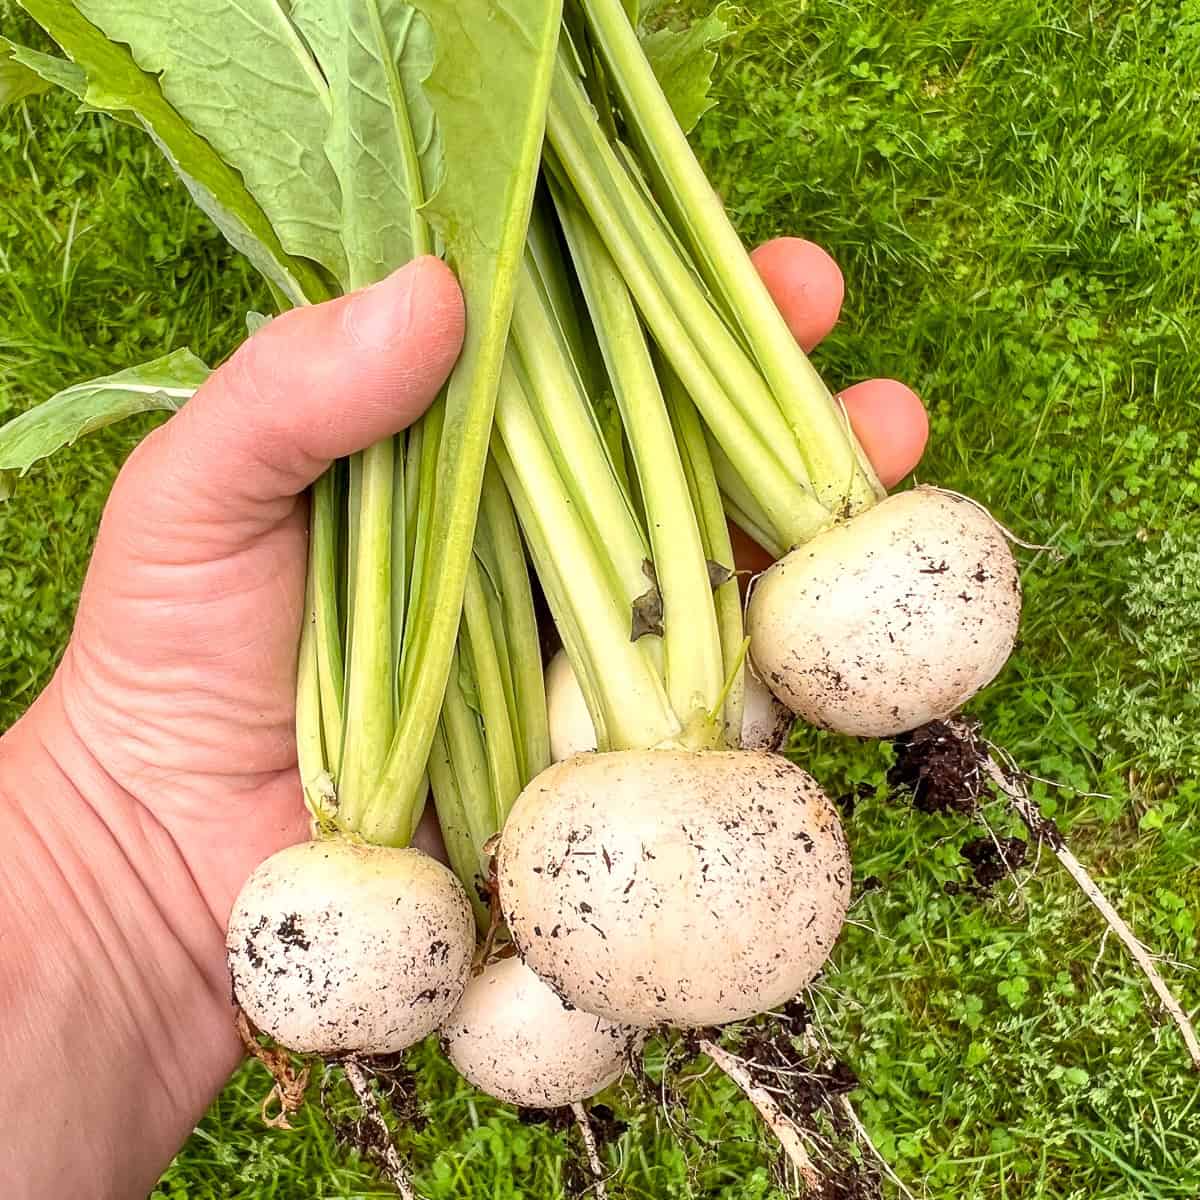 An image of a woman's hand holding a bunch of turnips.